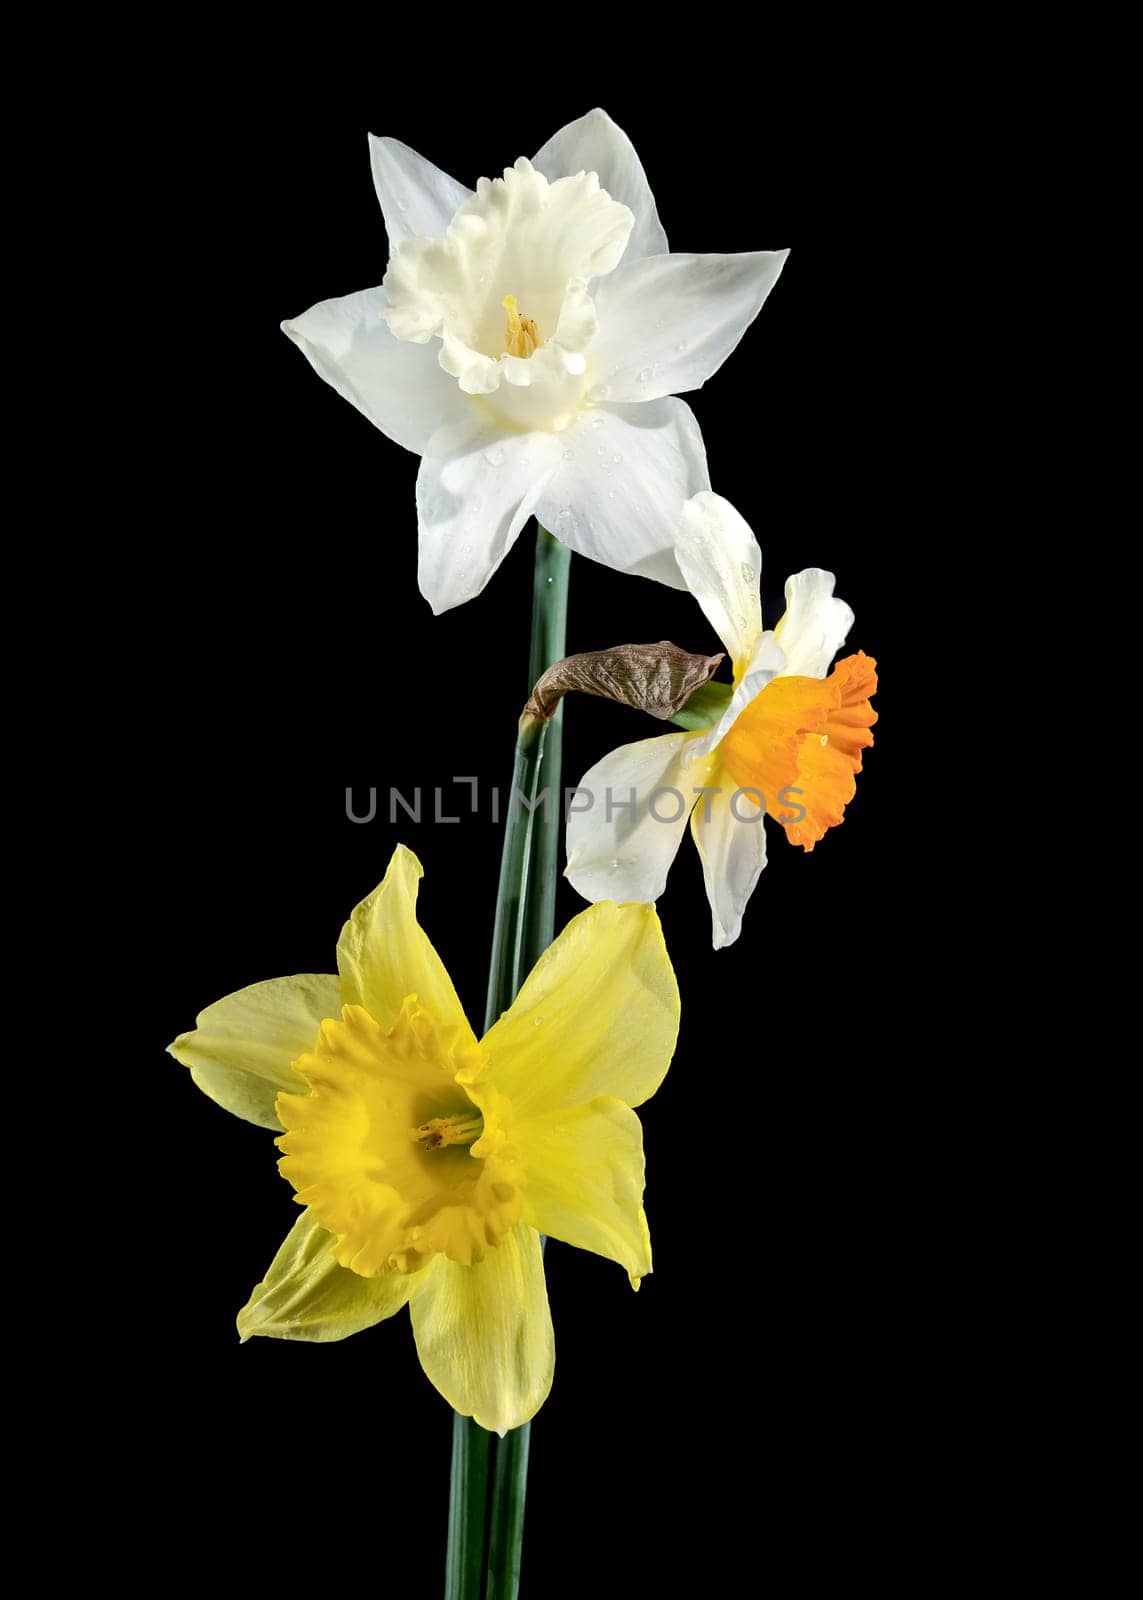 Beautiful blooming White and yellow narcissus flowers isolated on a black background. Flower head close-up.